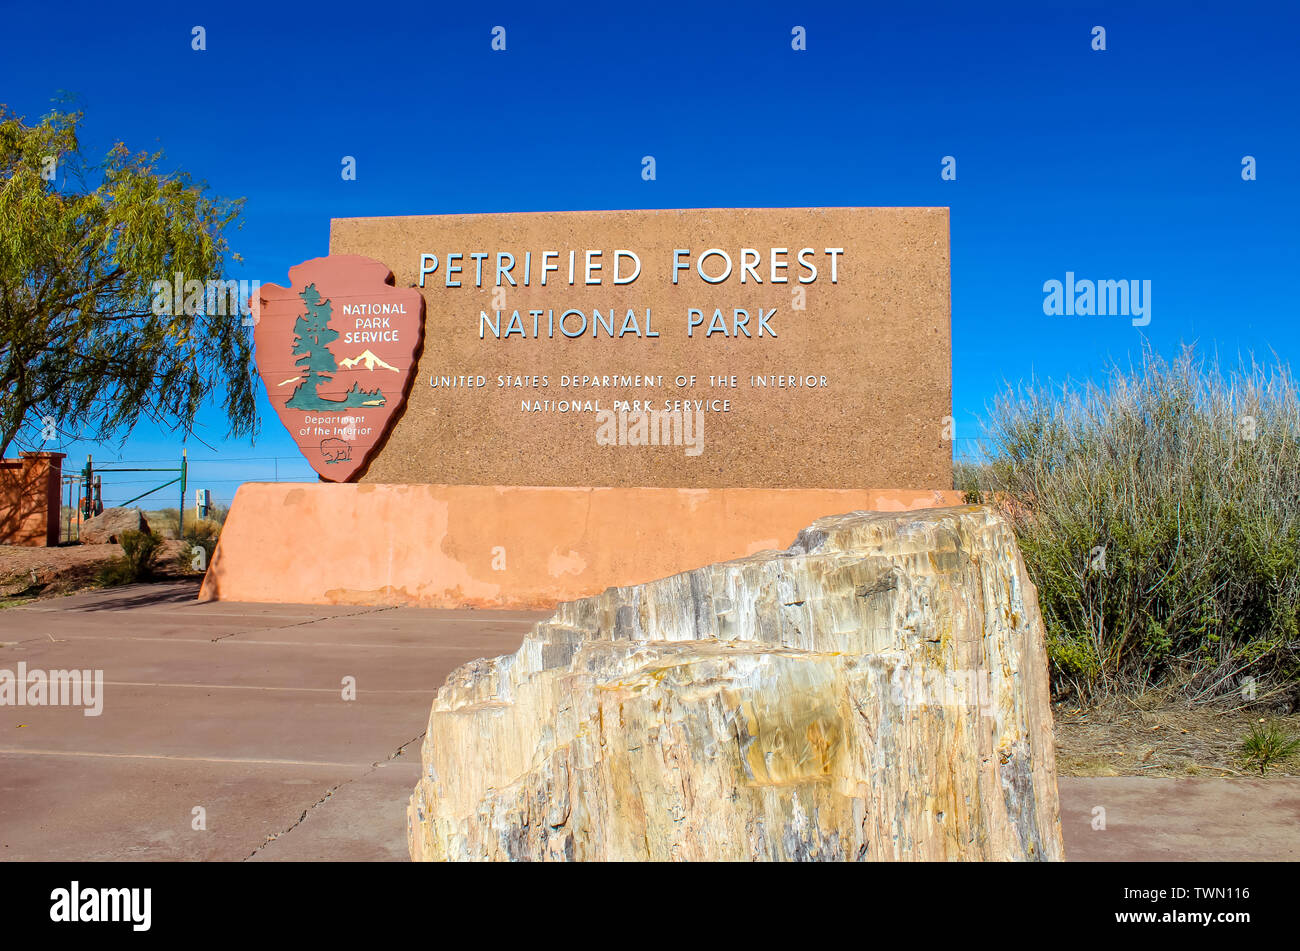 Petrifed Forest National Park Sign off Route 66 in the Arizona Dessert Stock Photo